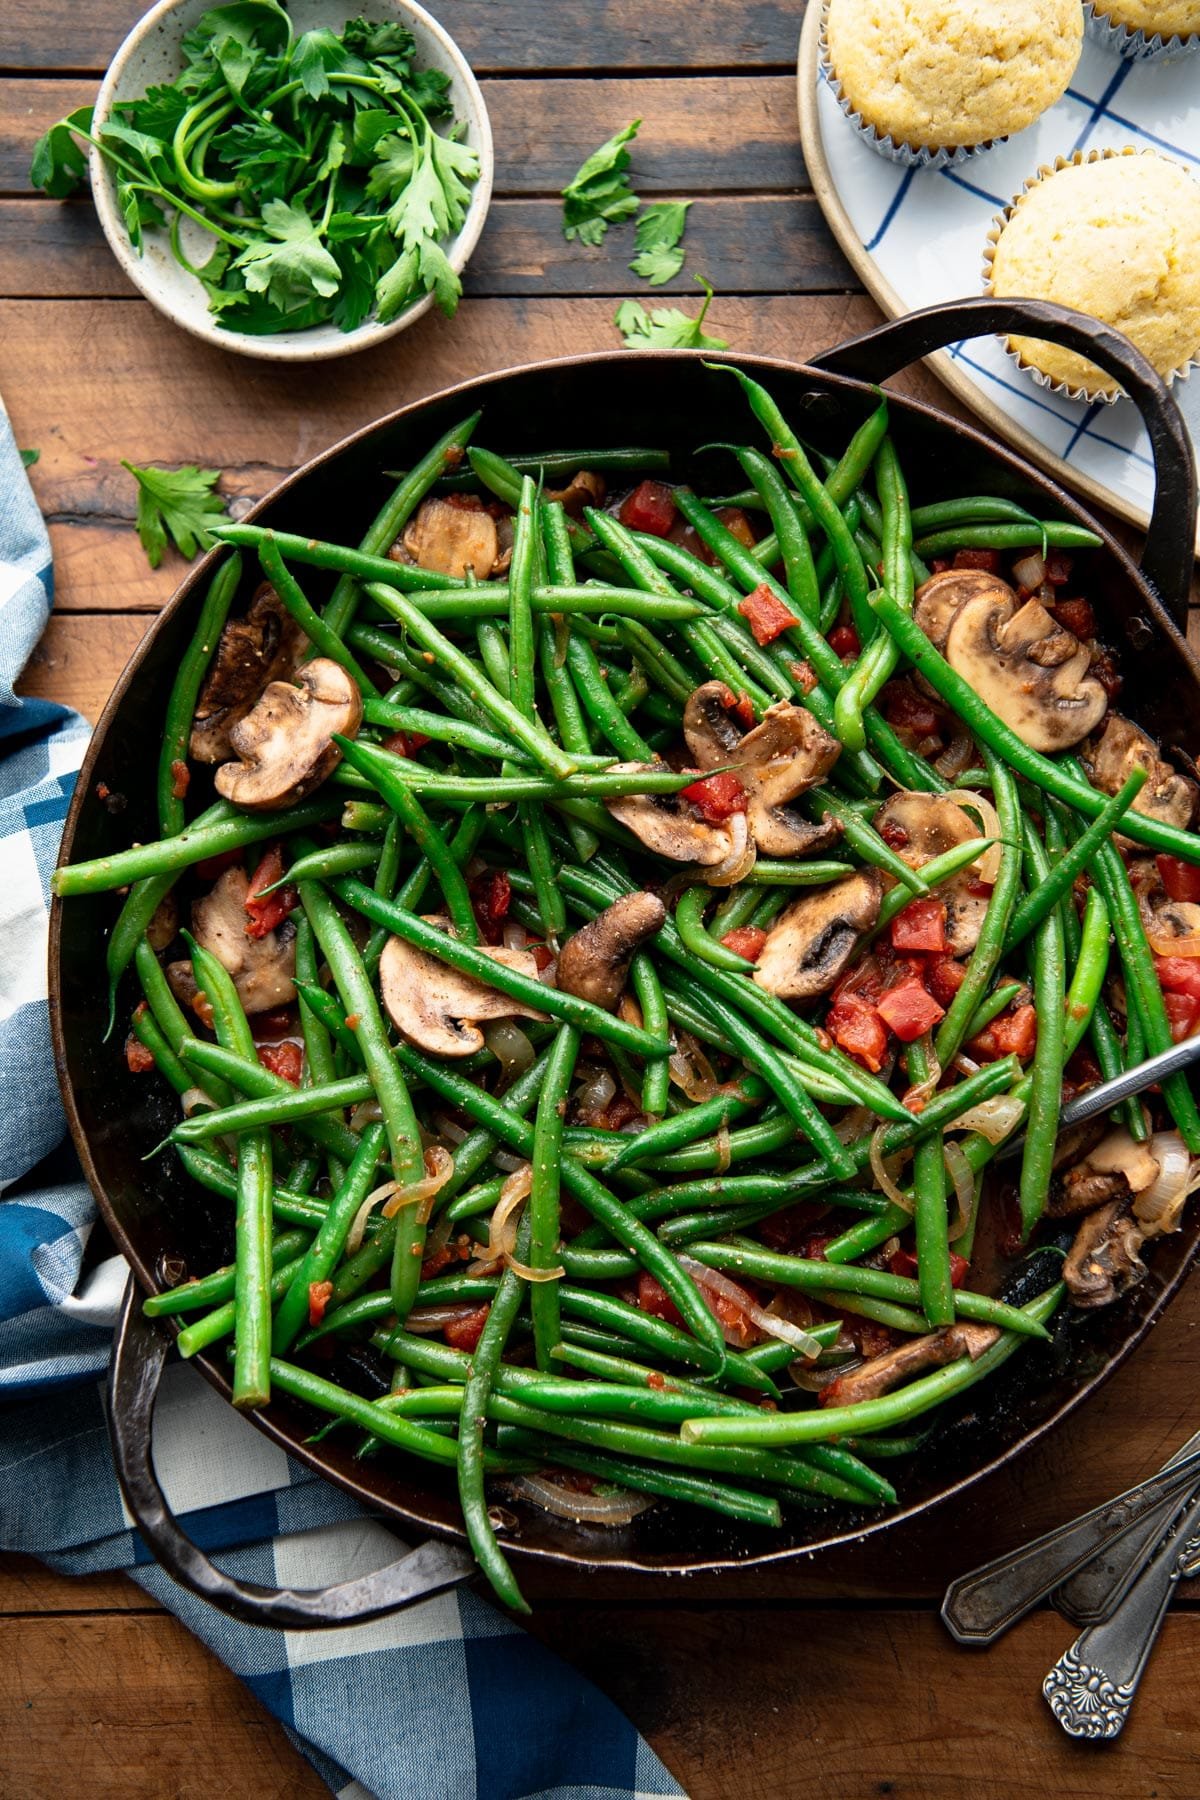 Overhead shot of green beans with mushrooms and onions on a wooden table.